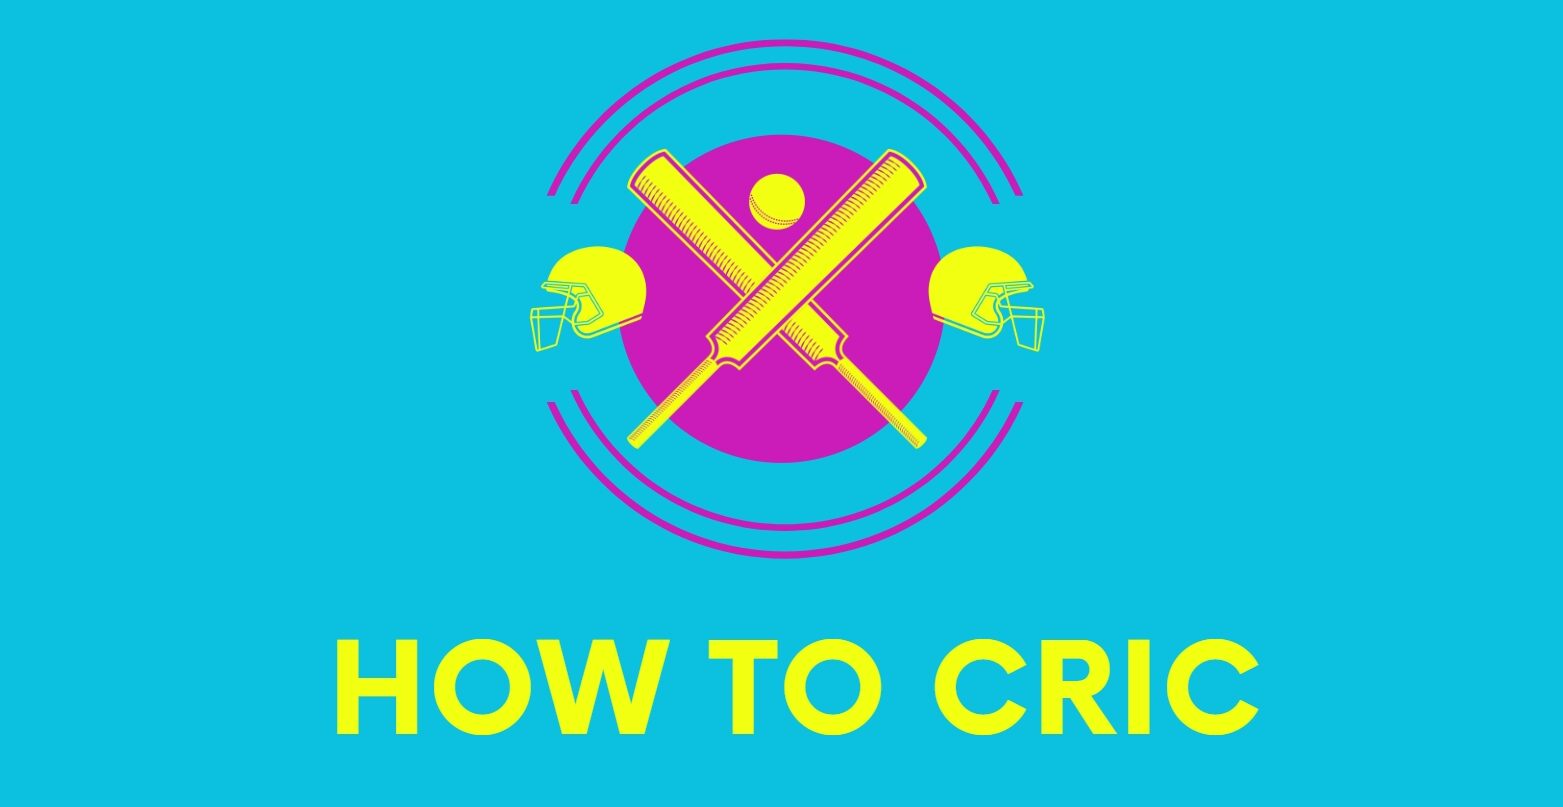 HOW TO CRIC